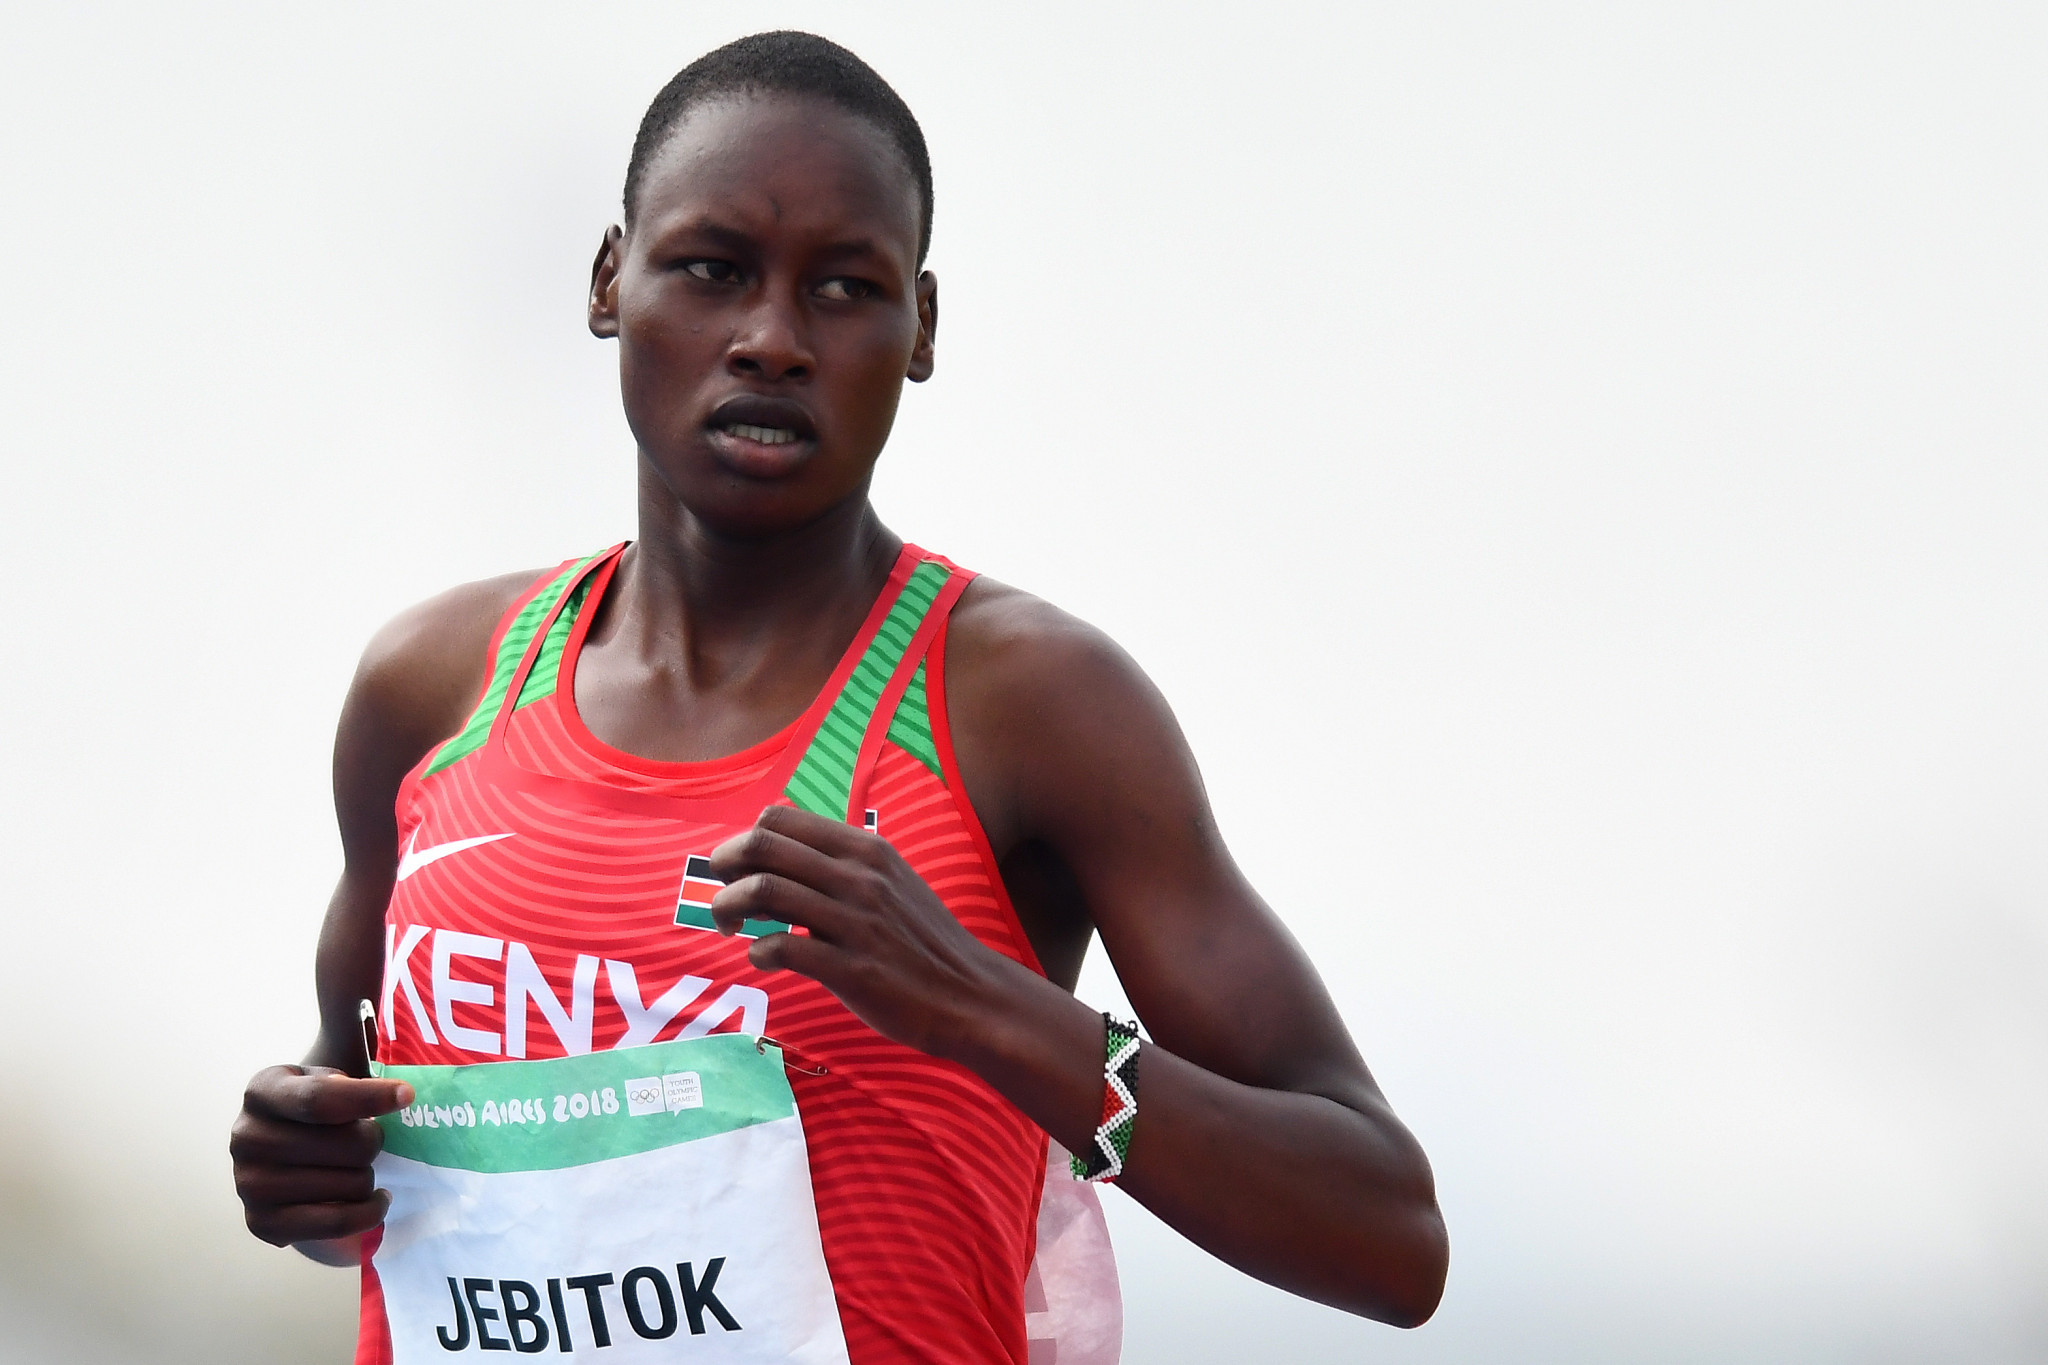 Kenya competed at the 2018 Youth Olympic Games in Buenos Aires ©Getty Images